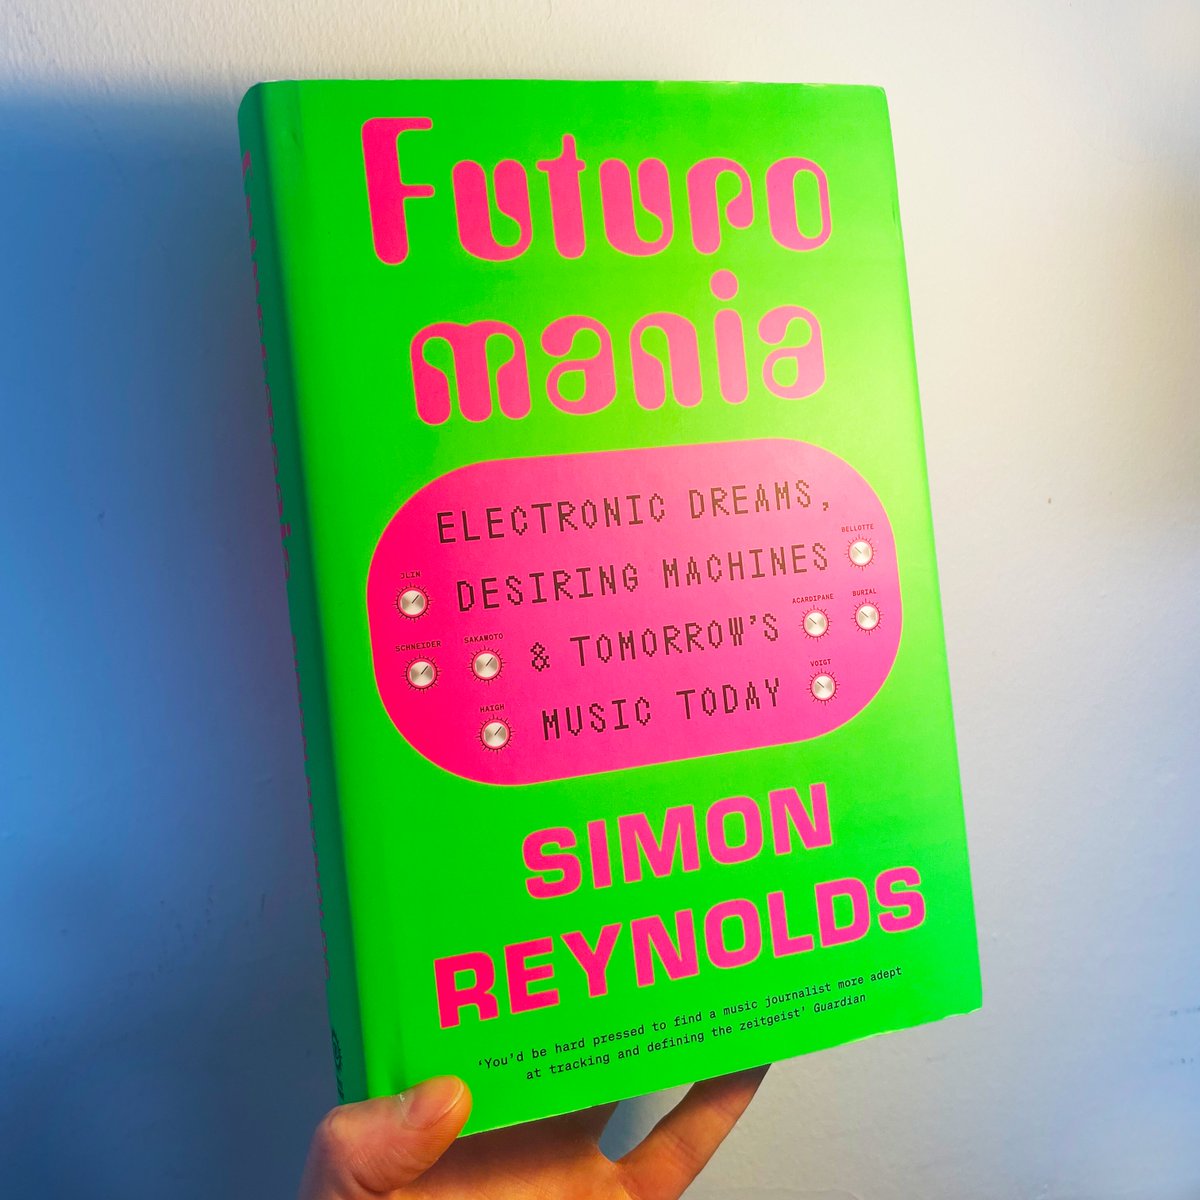 Today's a big one as we publish the first book in 8 years from one of *the* great music writers of his generation: @SimonRetromania #FUTUROMANIA celebrates music that feels like a taste of tomorrow, propelling readers towards new adventures in sound. 🎛️ geni.us/Futuromania